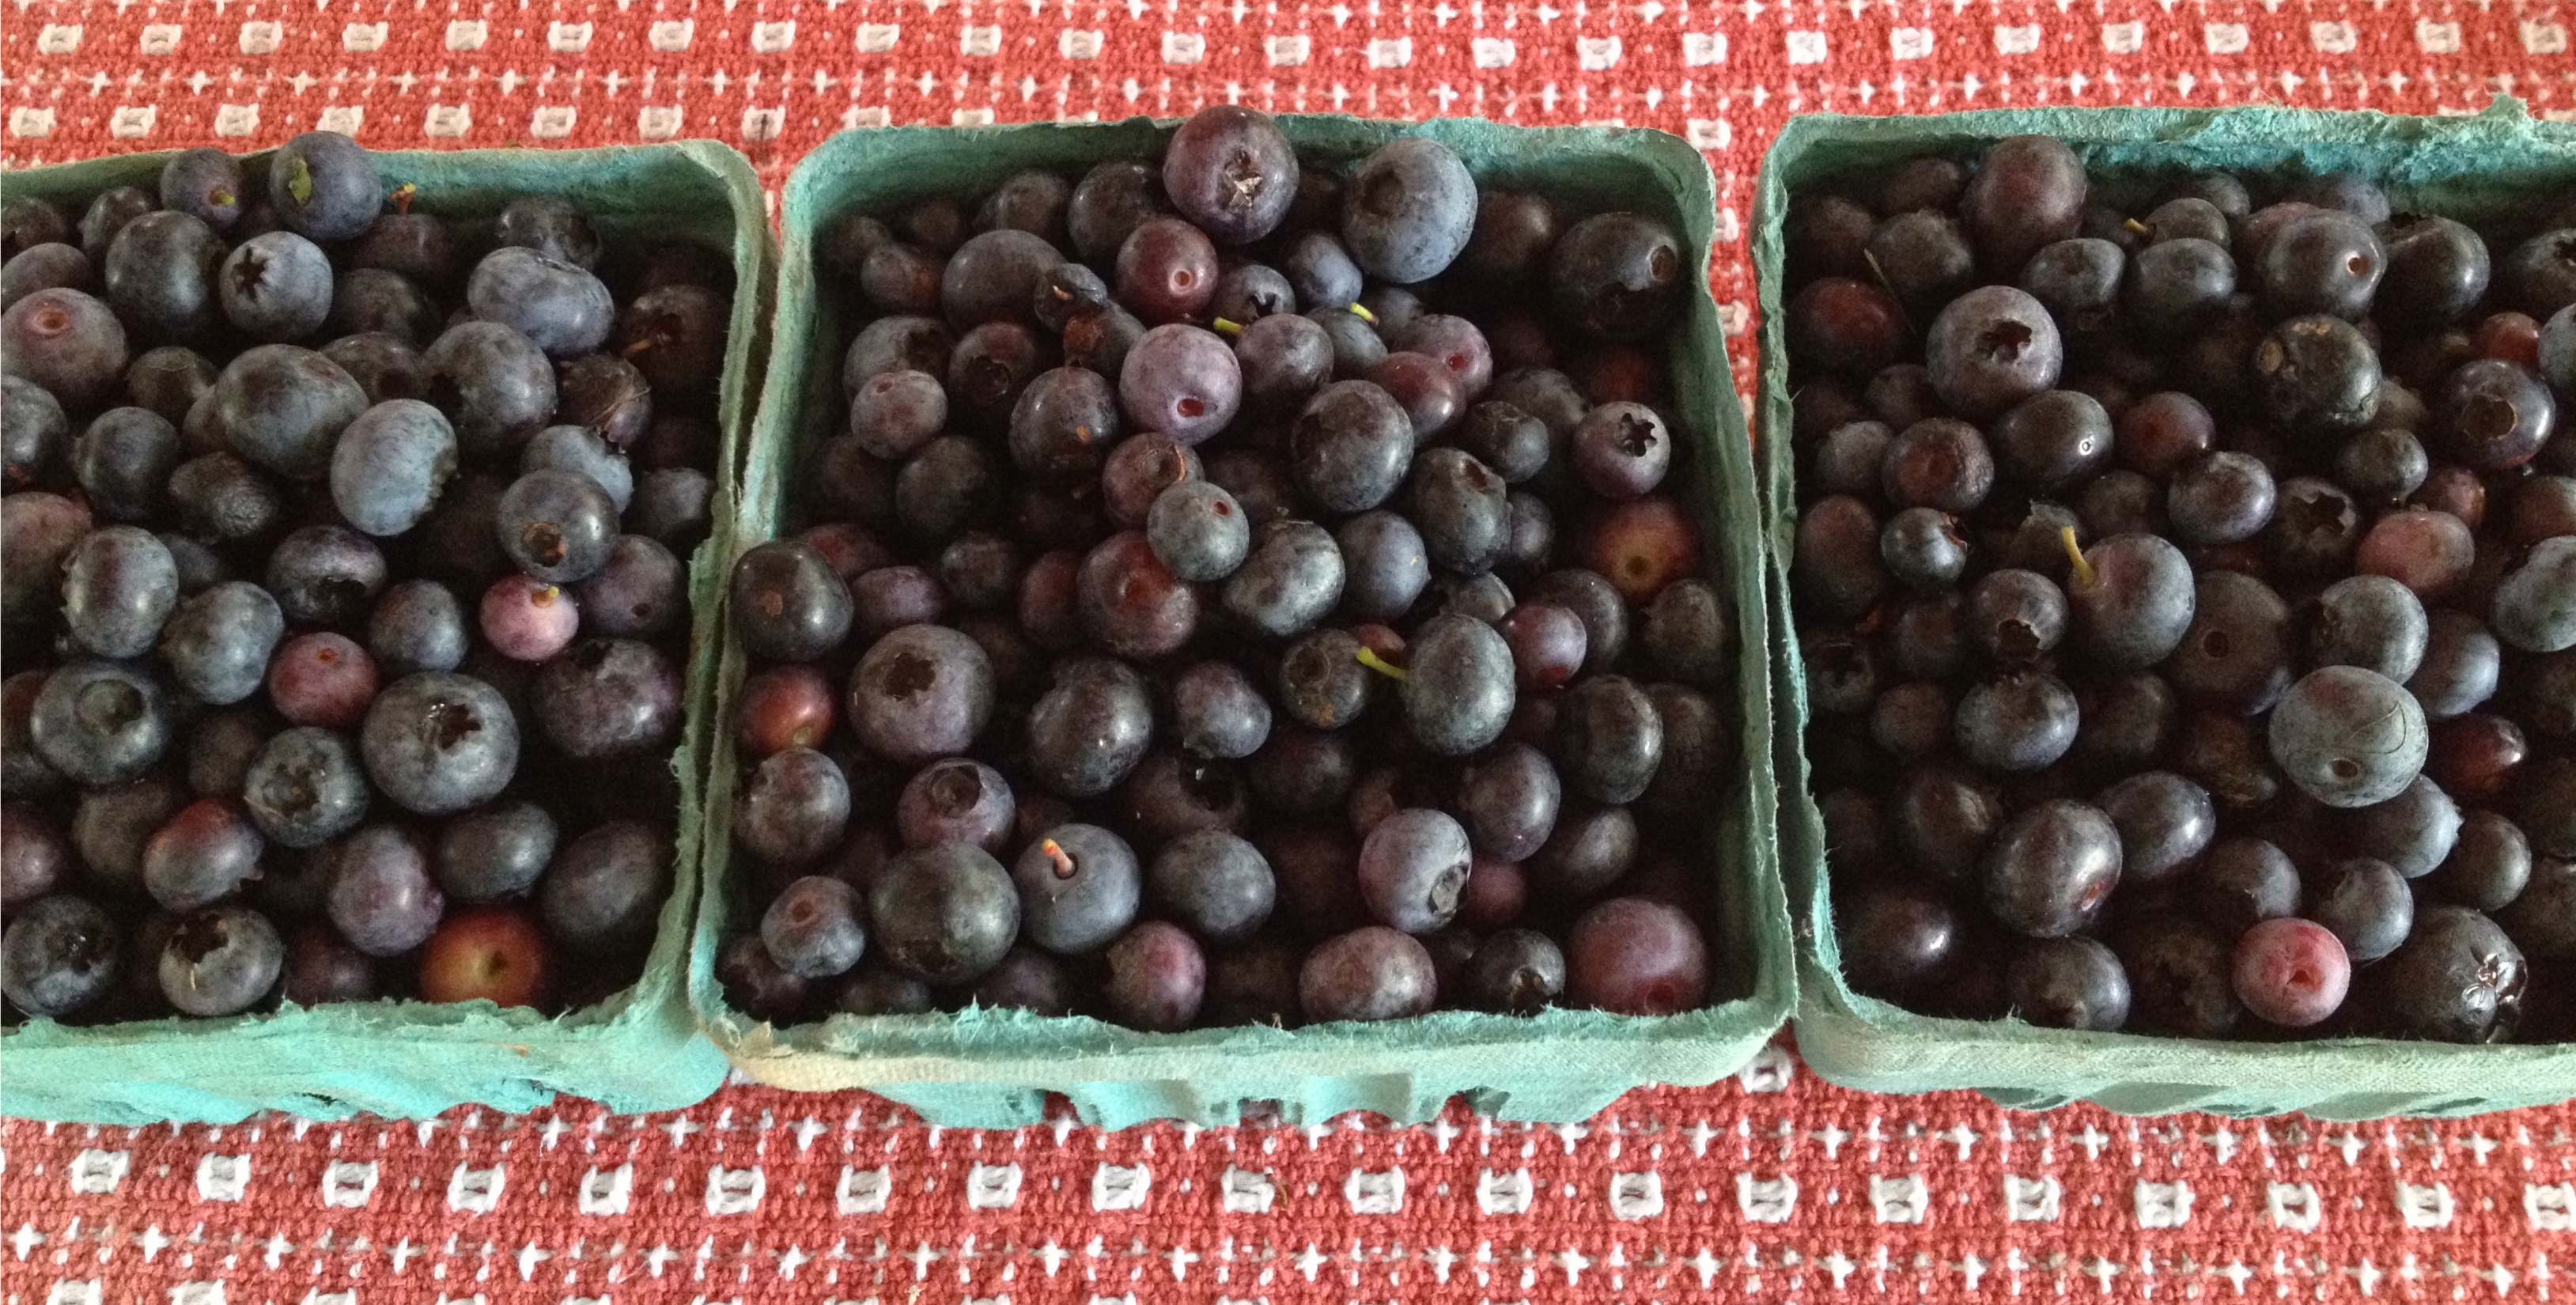 Locally grown blueberries in cartons.